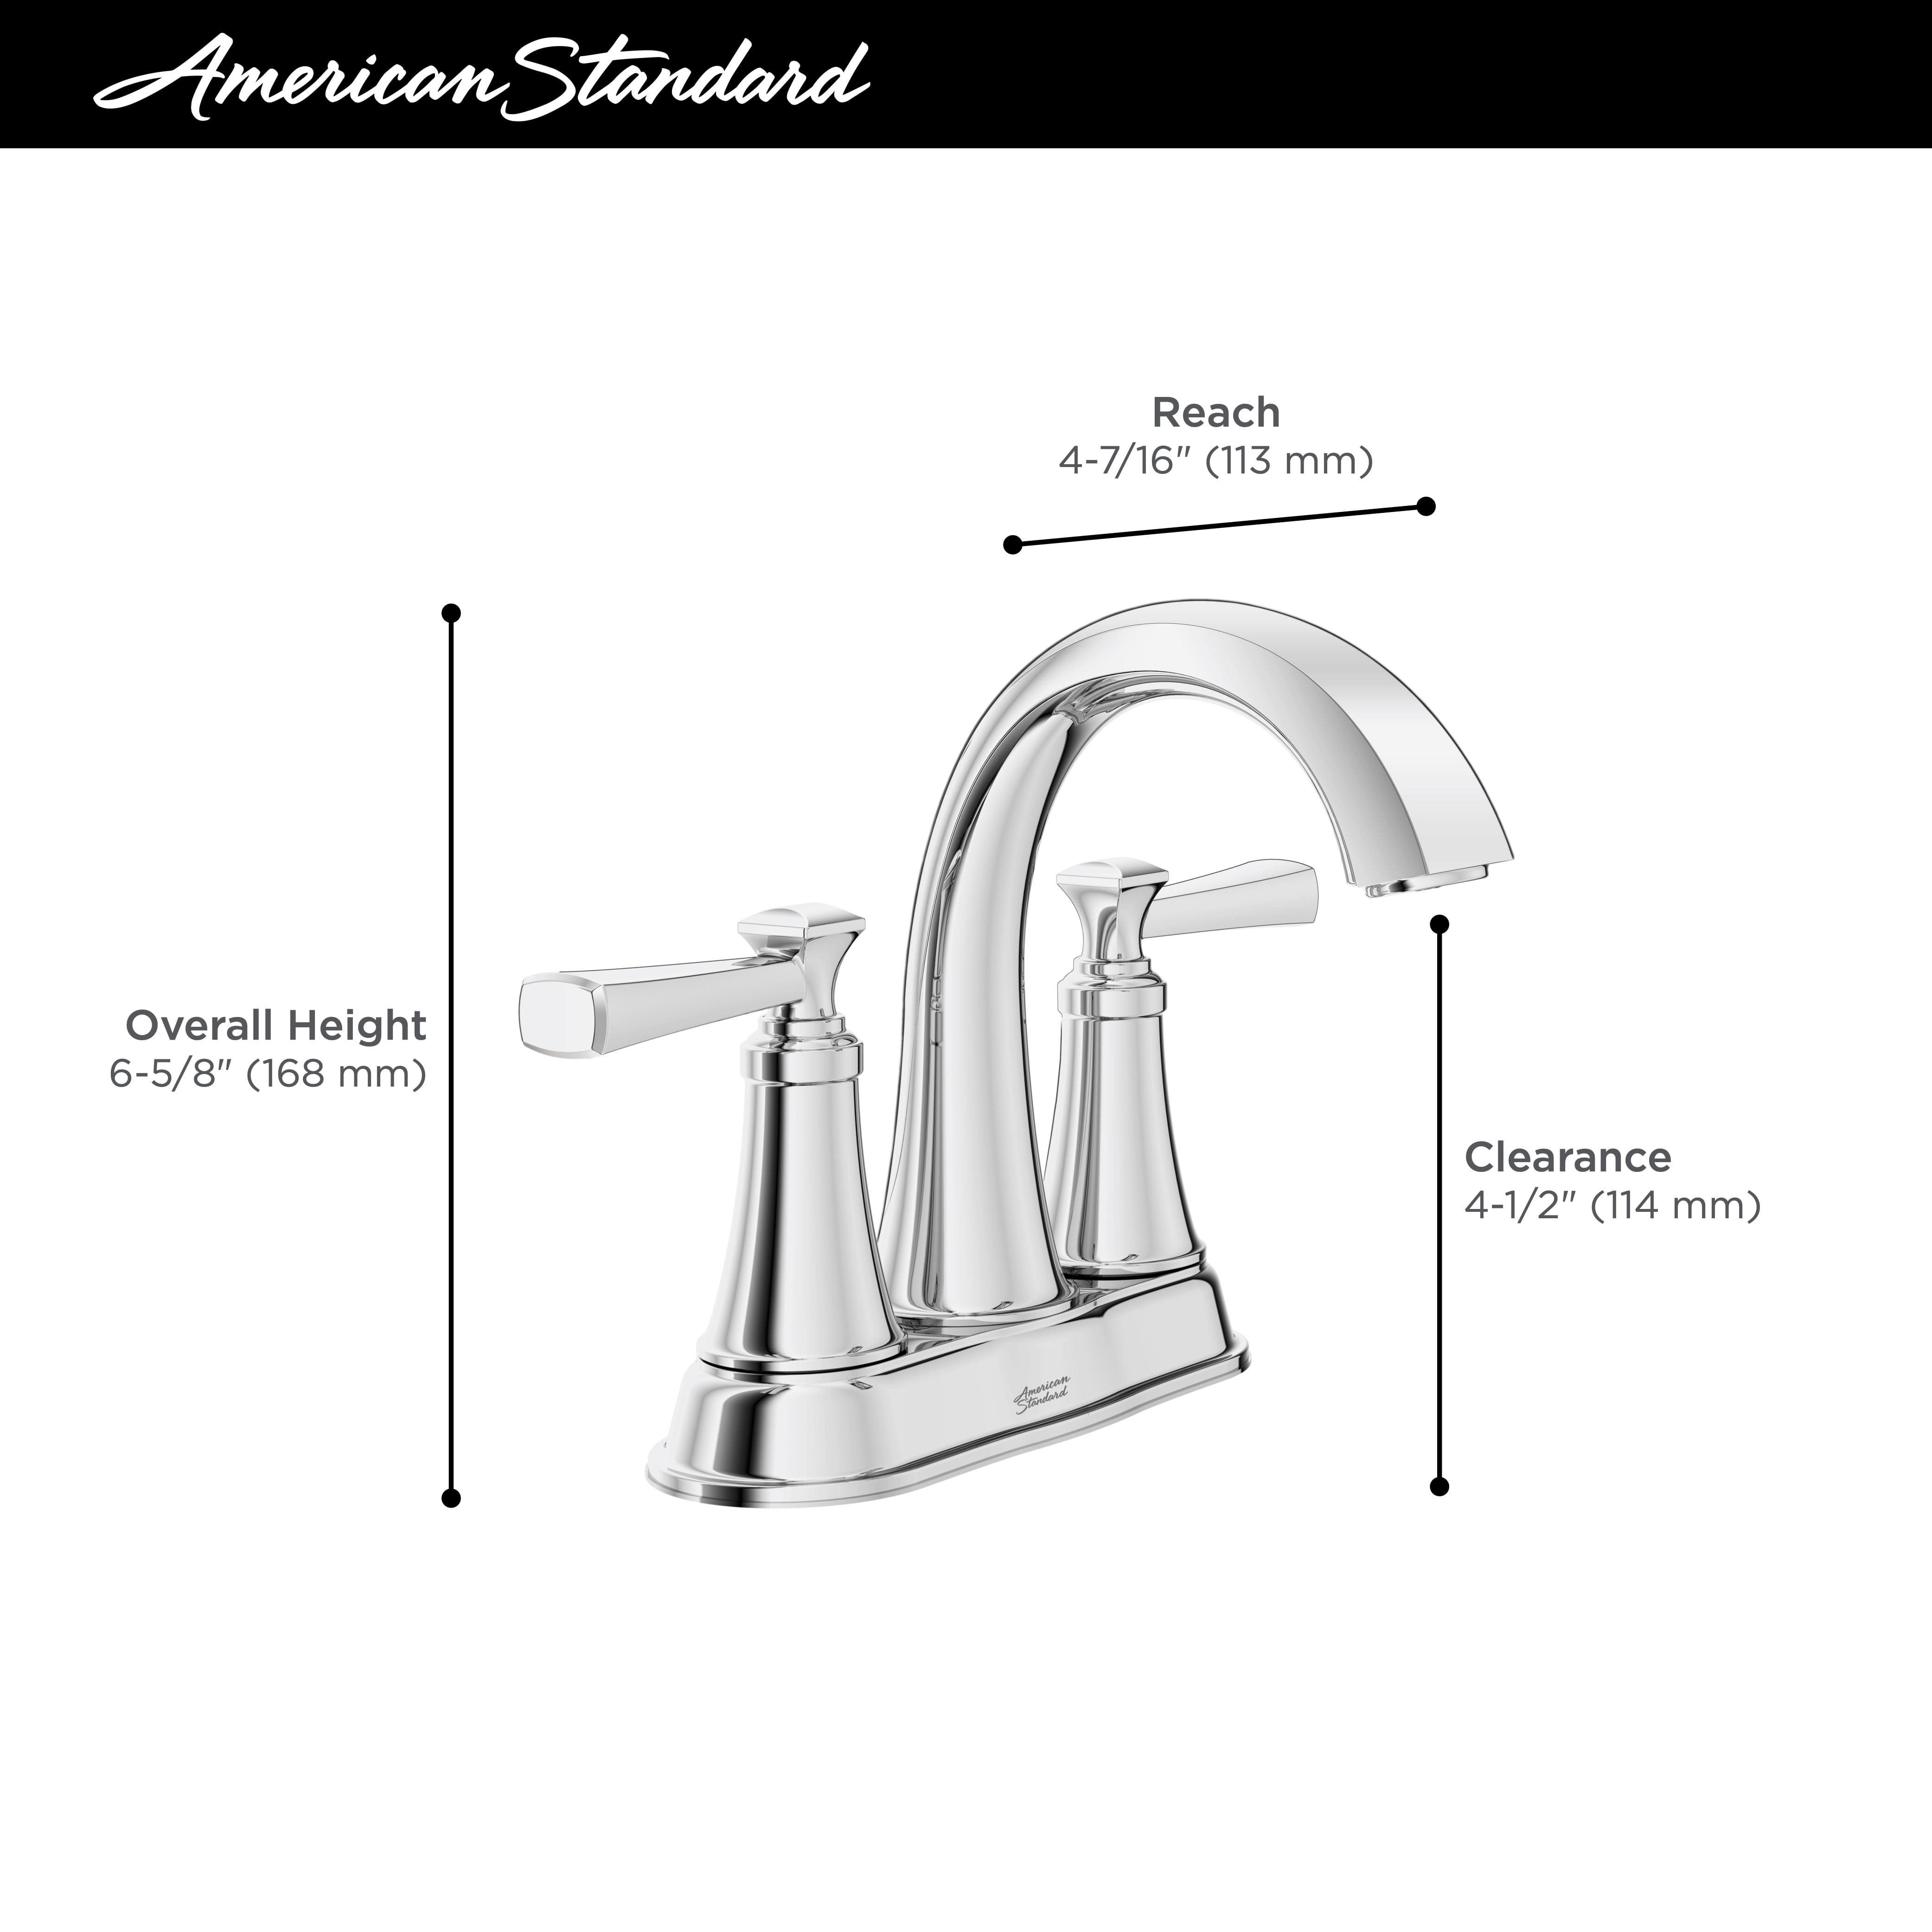 Glenmere™ 4-Inch Centerset 2-Handle Bathroom Faucet 1.2 gpm/4.5 L/min With Lever Handles